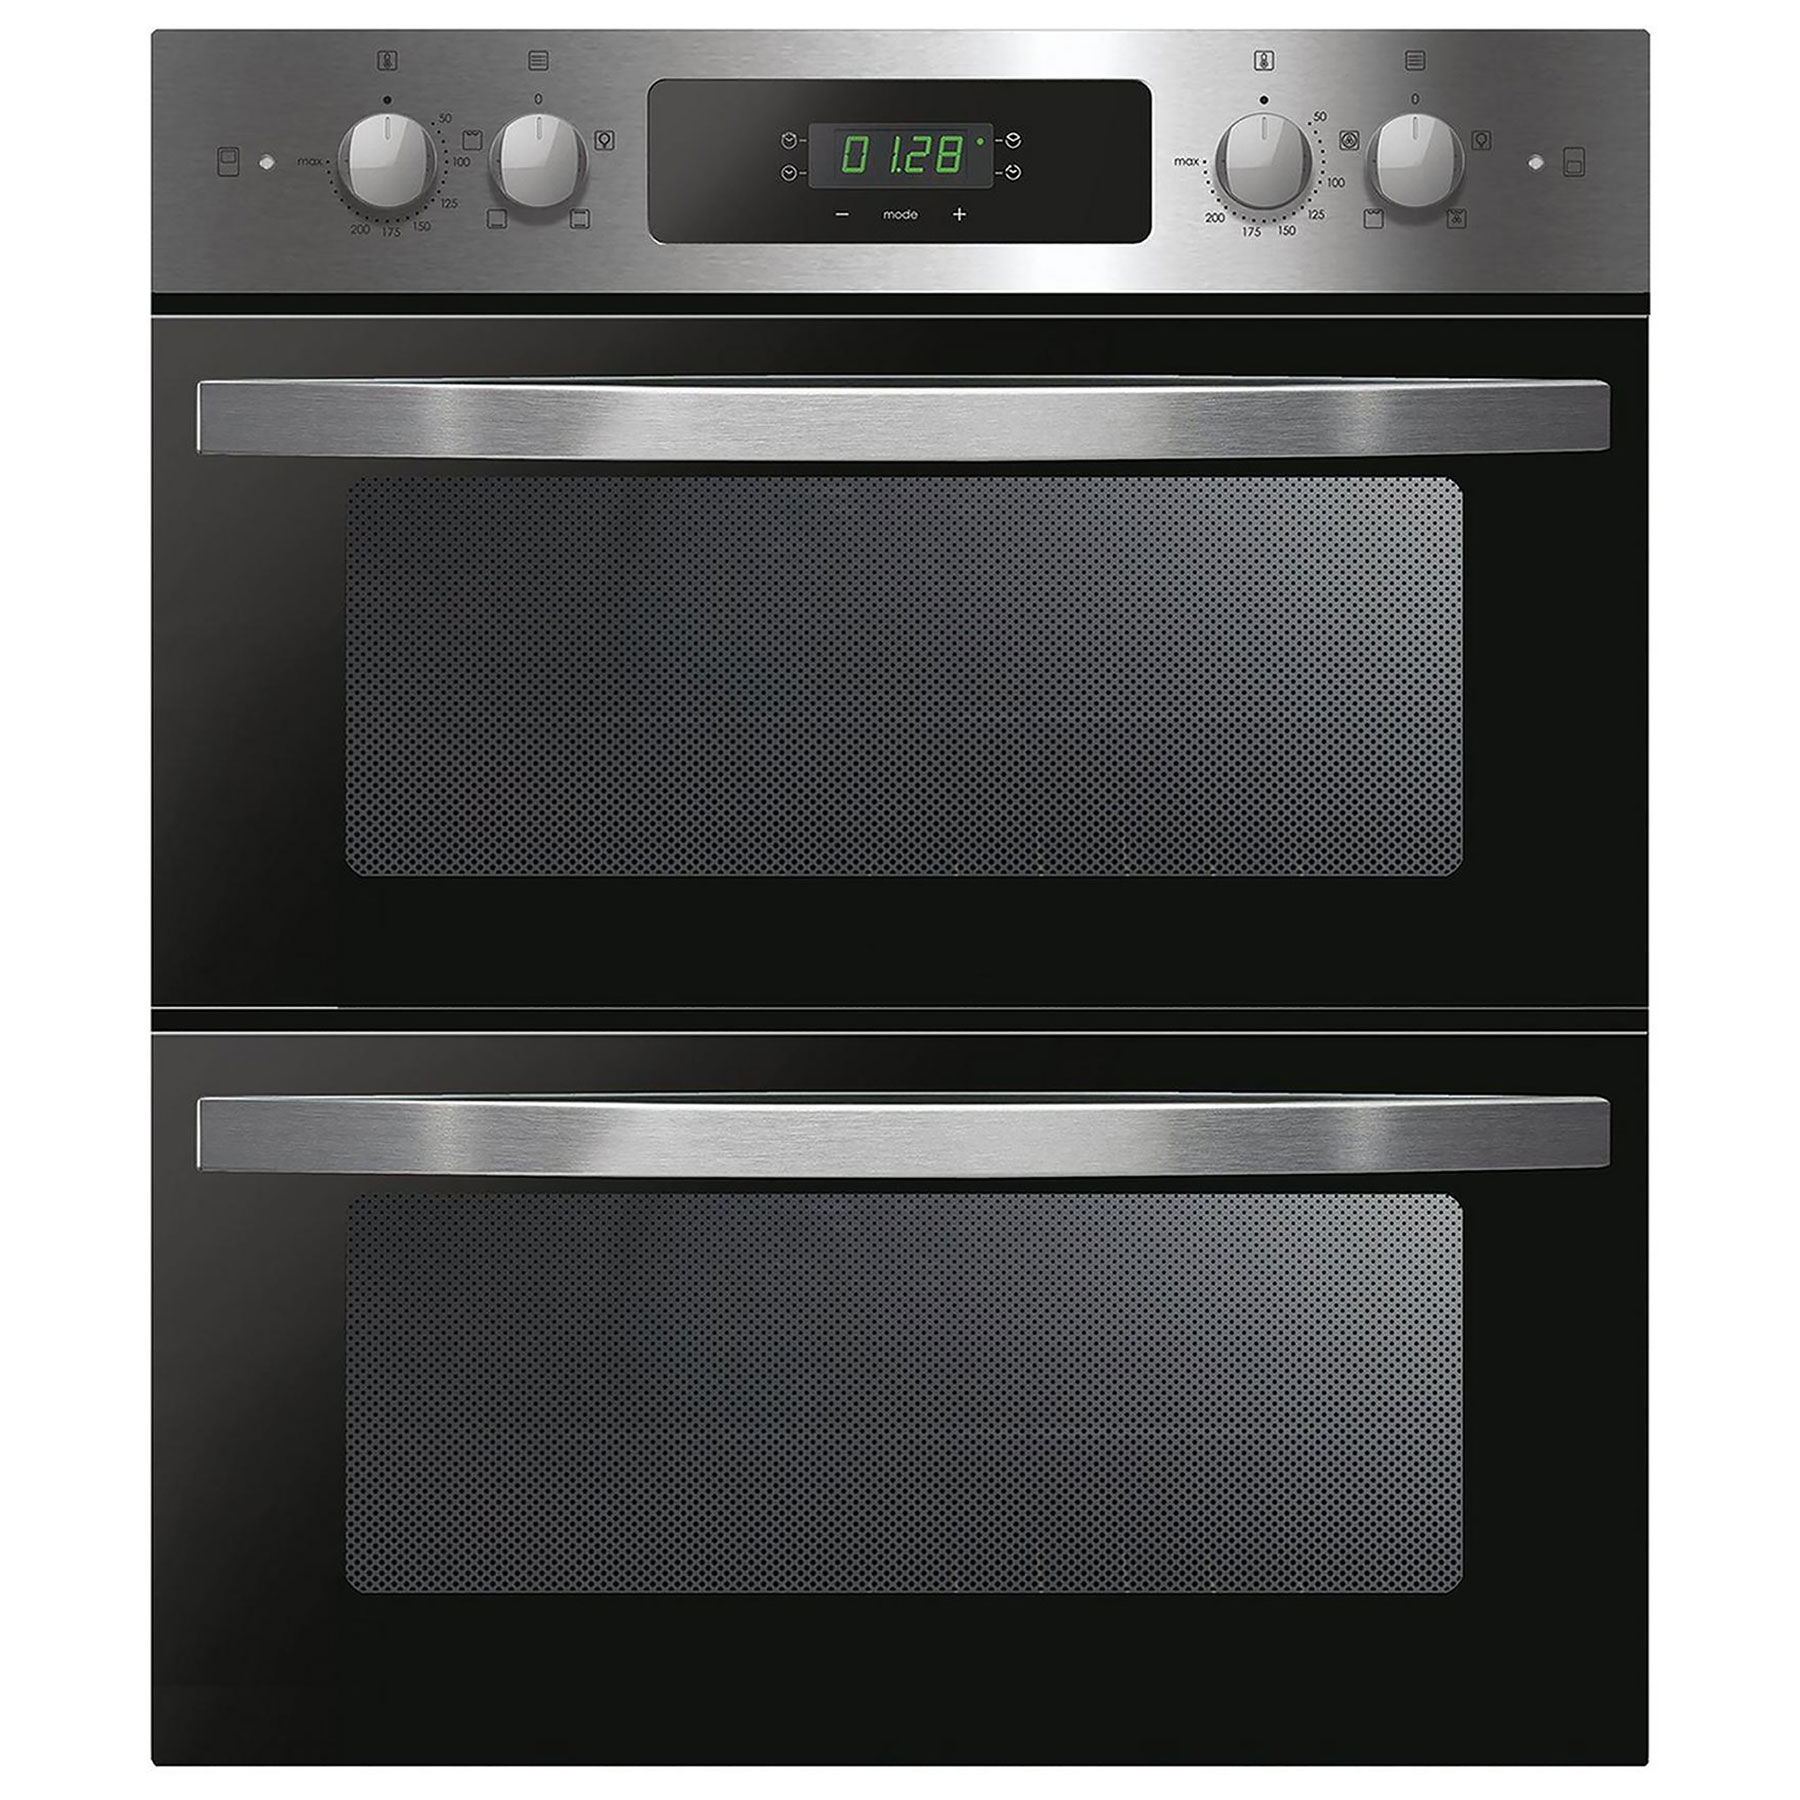 Candy FCI7D405X Built Under Electric Double Oven in St Steel A A Rated